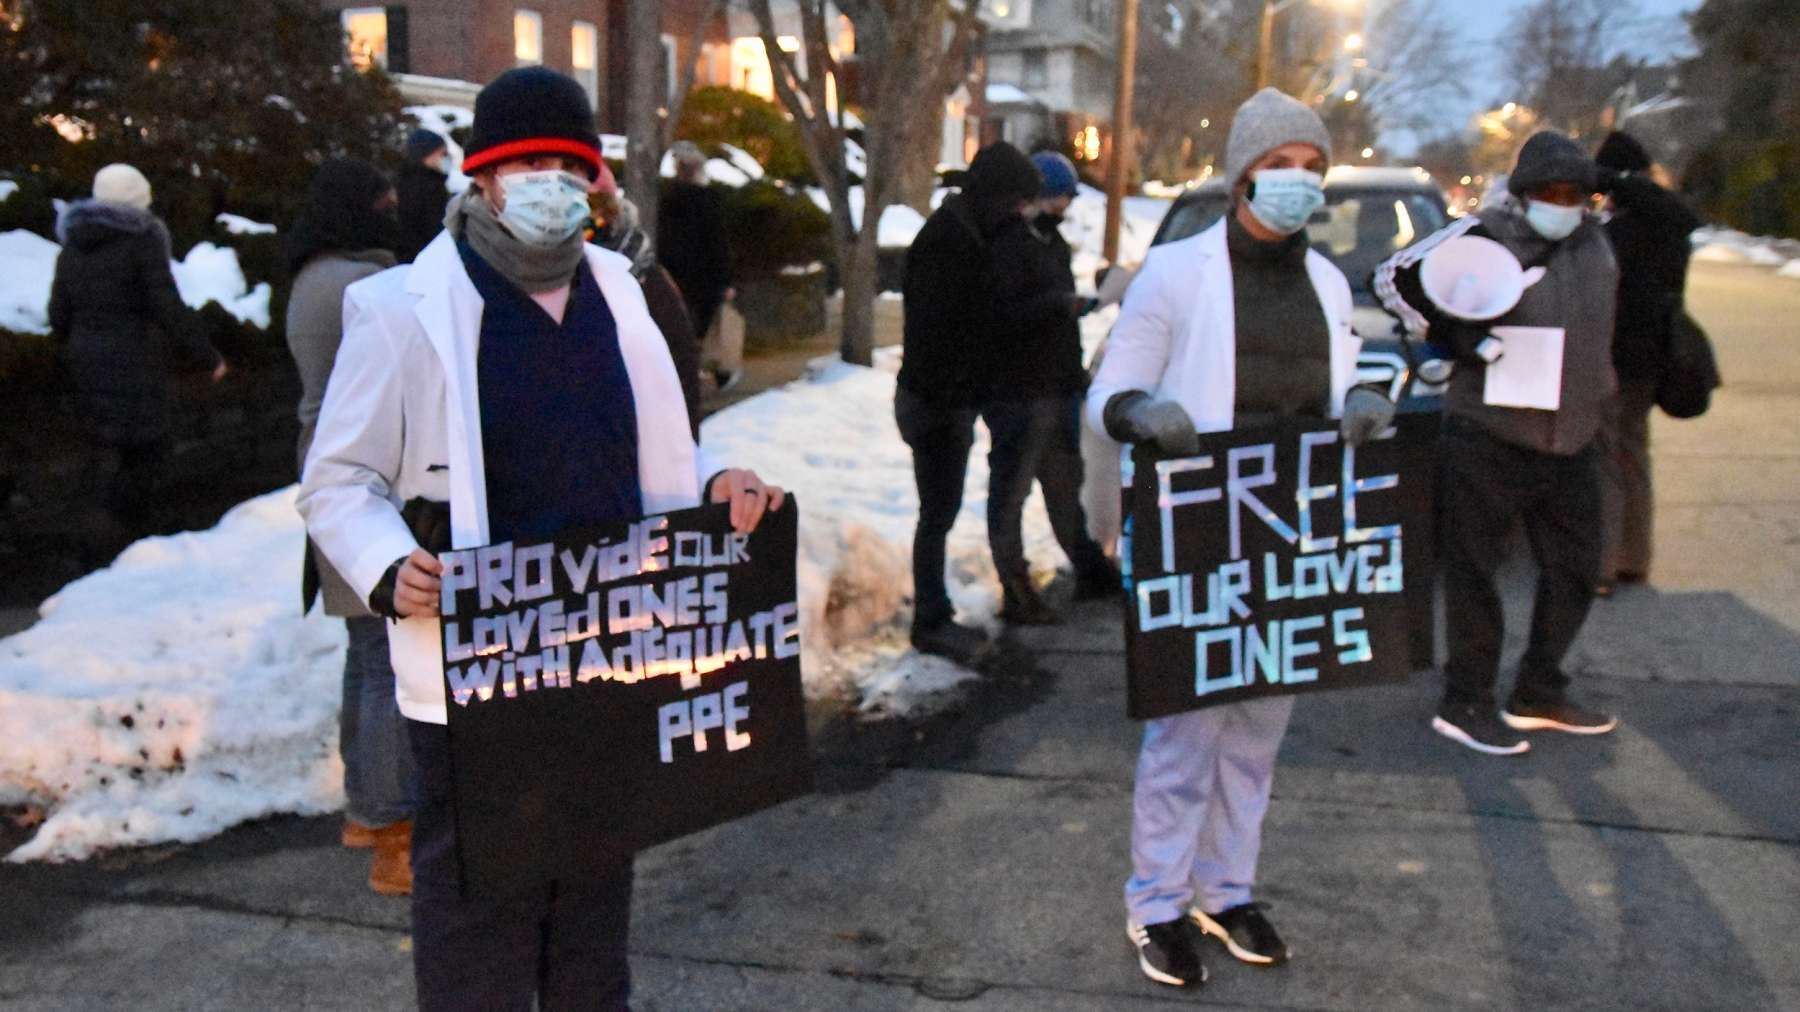 Rhode Island News: Statement from Code Black on their protest at Governor Raimondo’s home